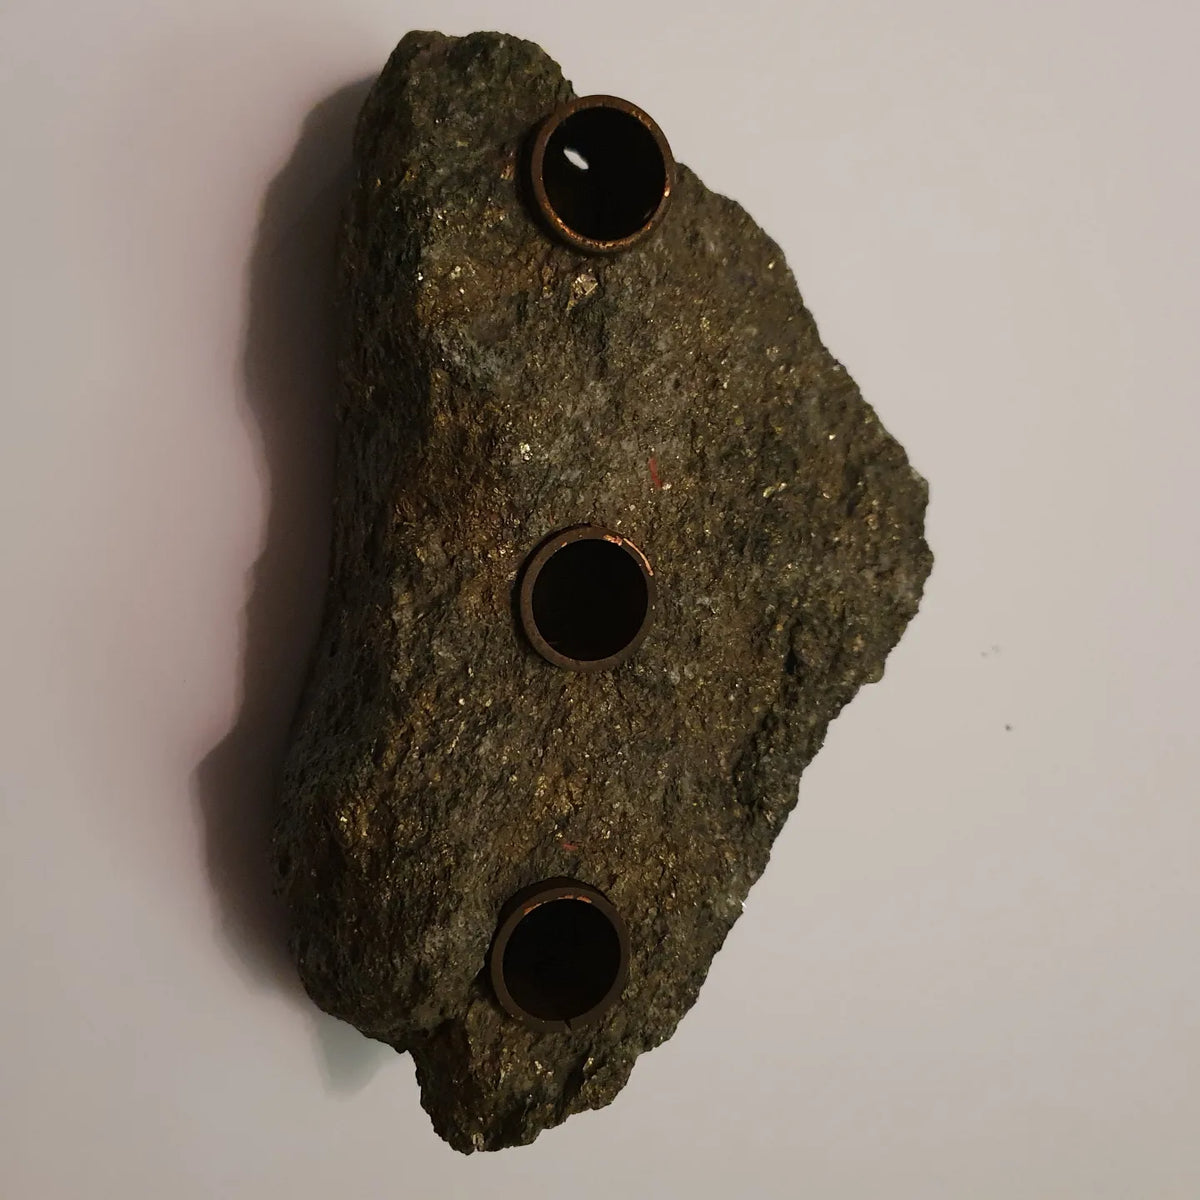 Vintage stone candleholder made by Saulo AS in Sulitjelma, Norway